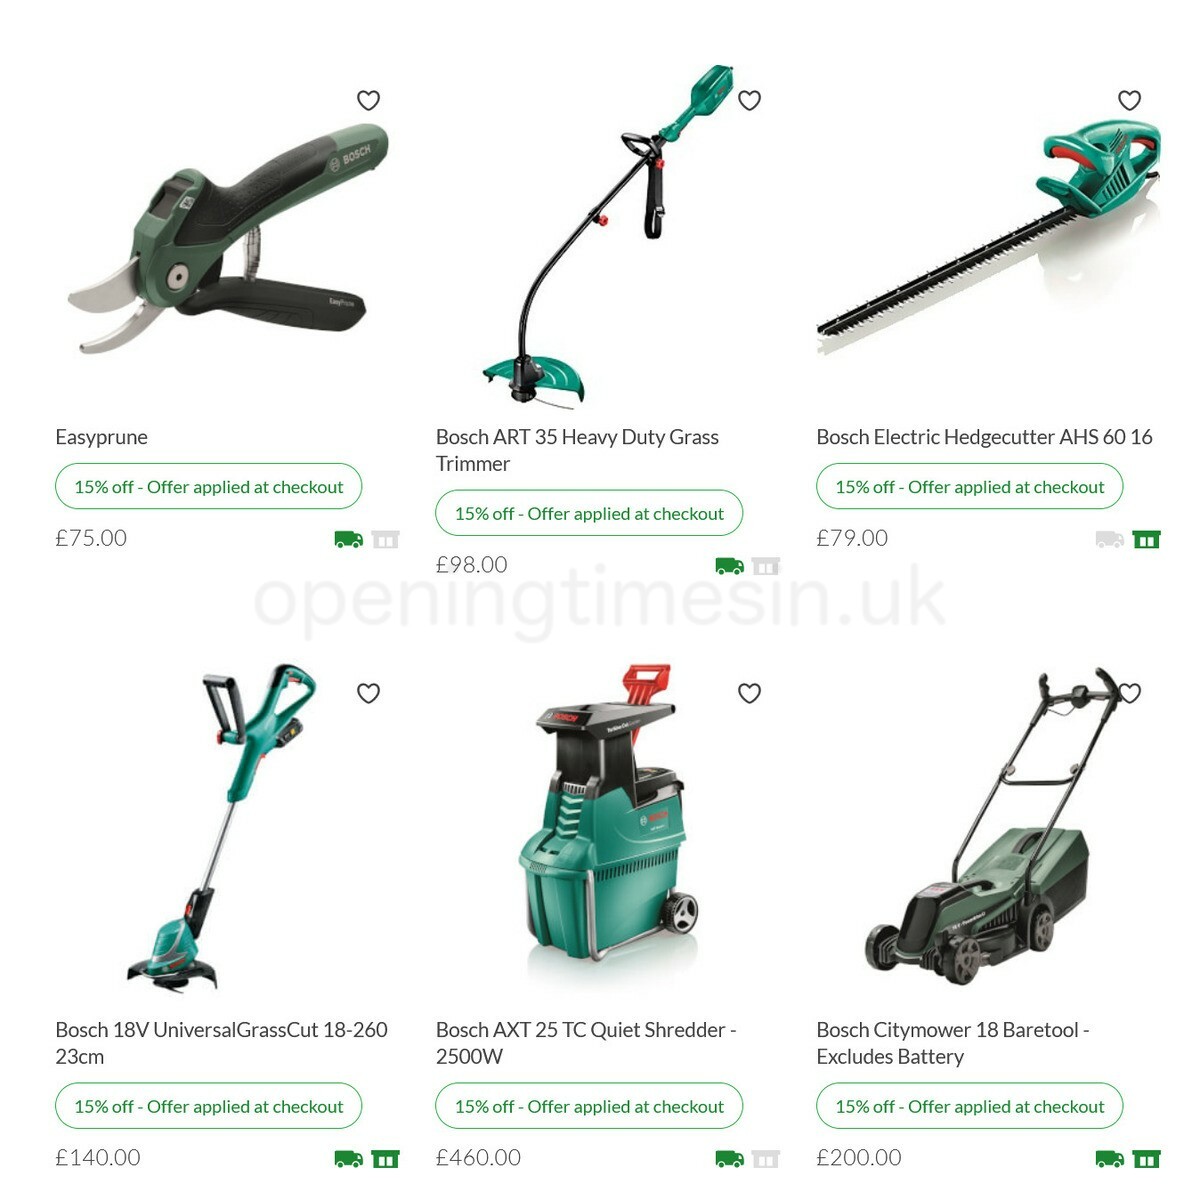 Homebase Offers from 21 April